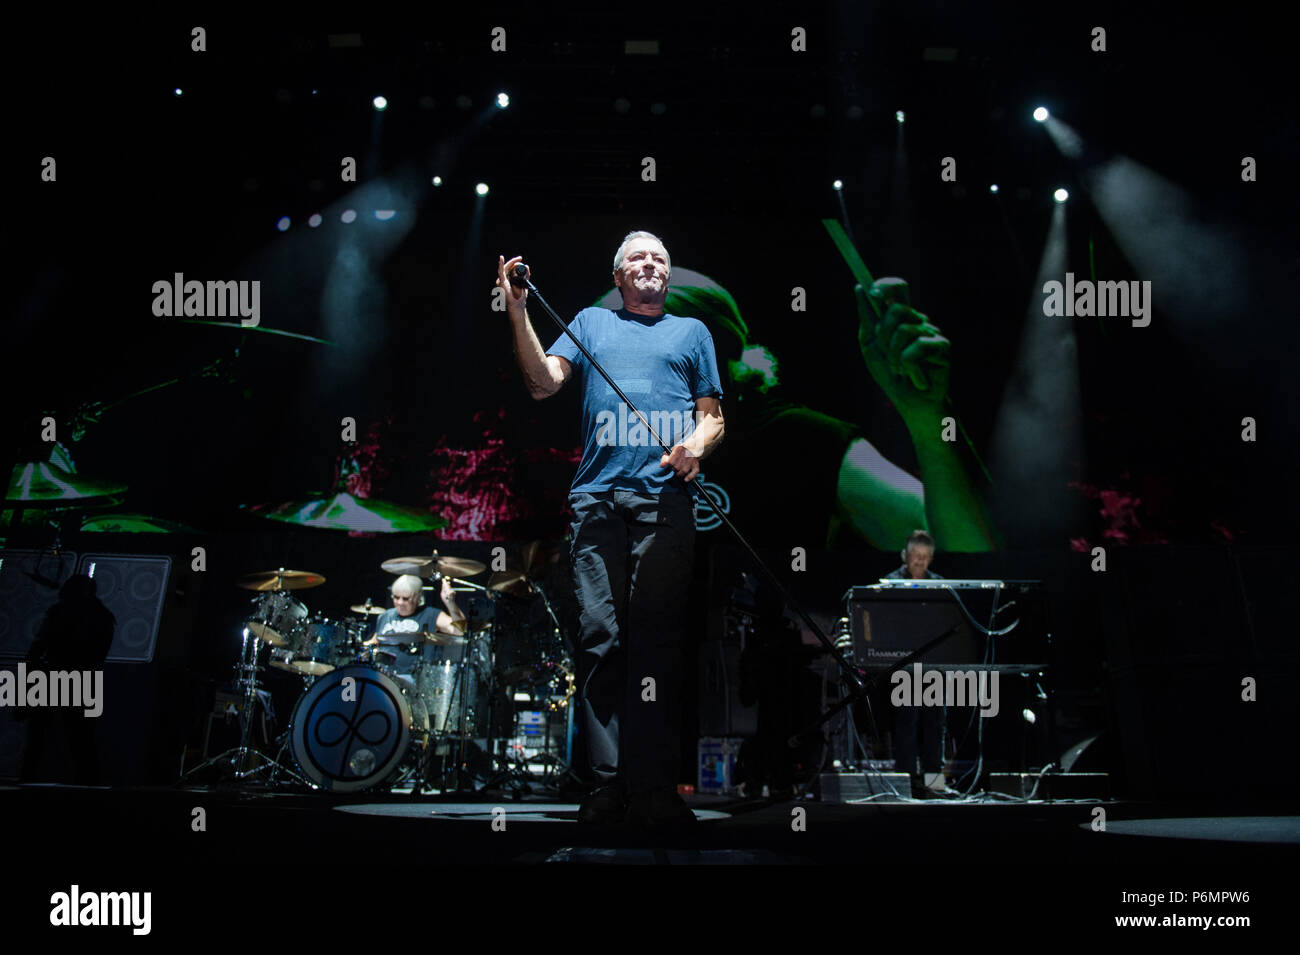 Deep Purple vocalist, Ian Gillan performs. Deep purple band performs at Tauron Arena Krakow as part of the farewell tour, The Long Goodbye Tour. Stock Photo